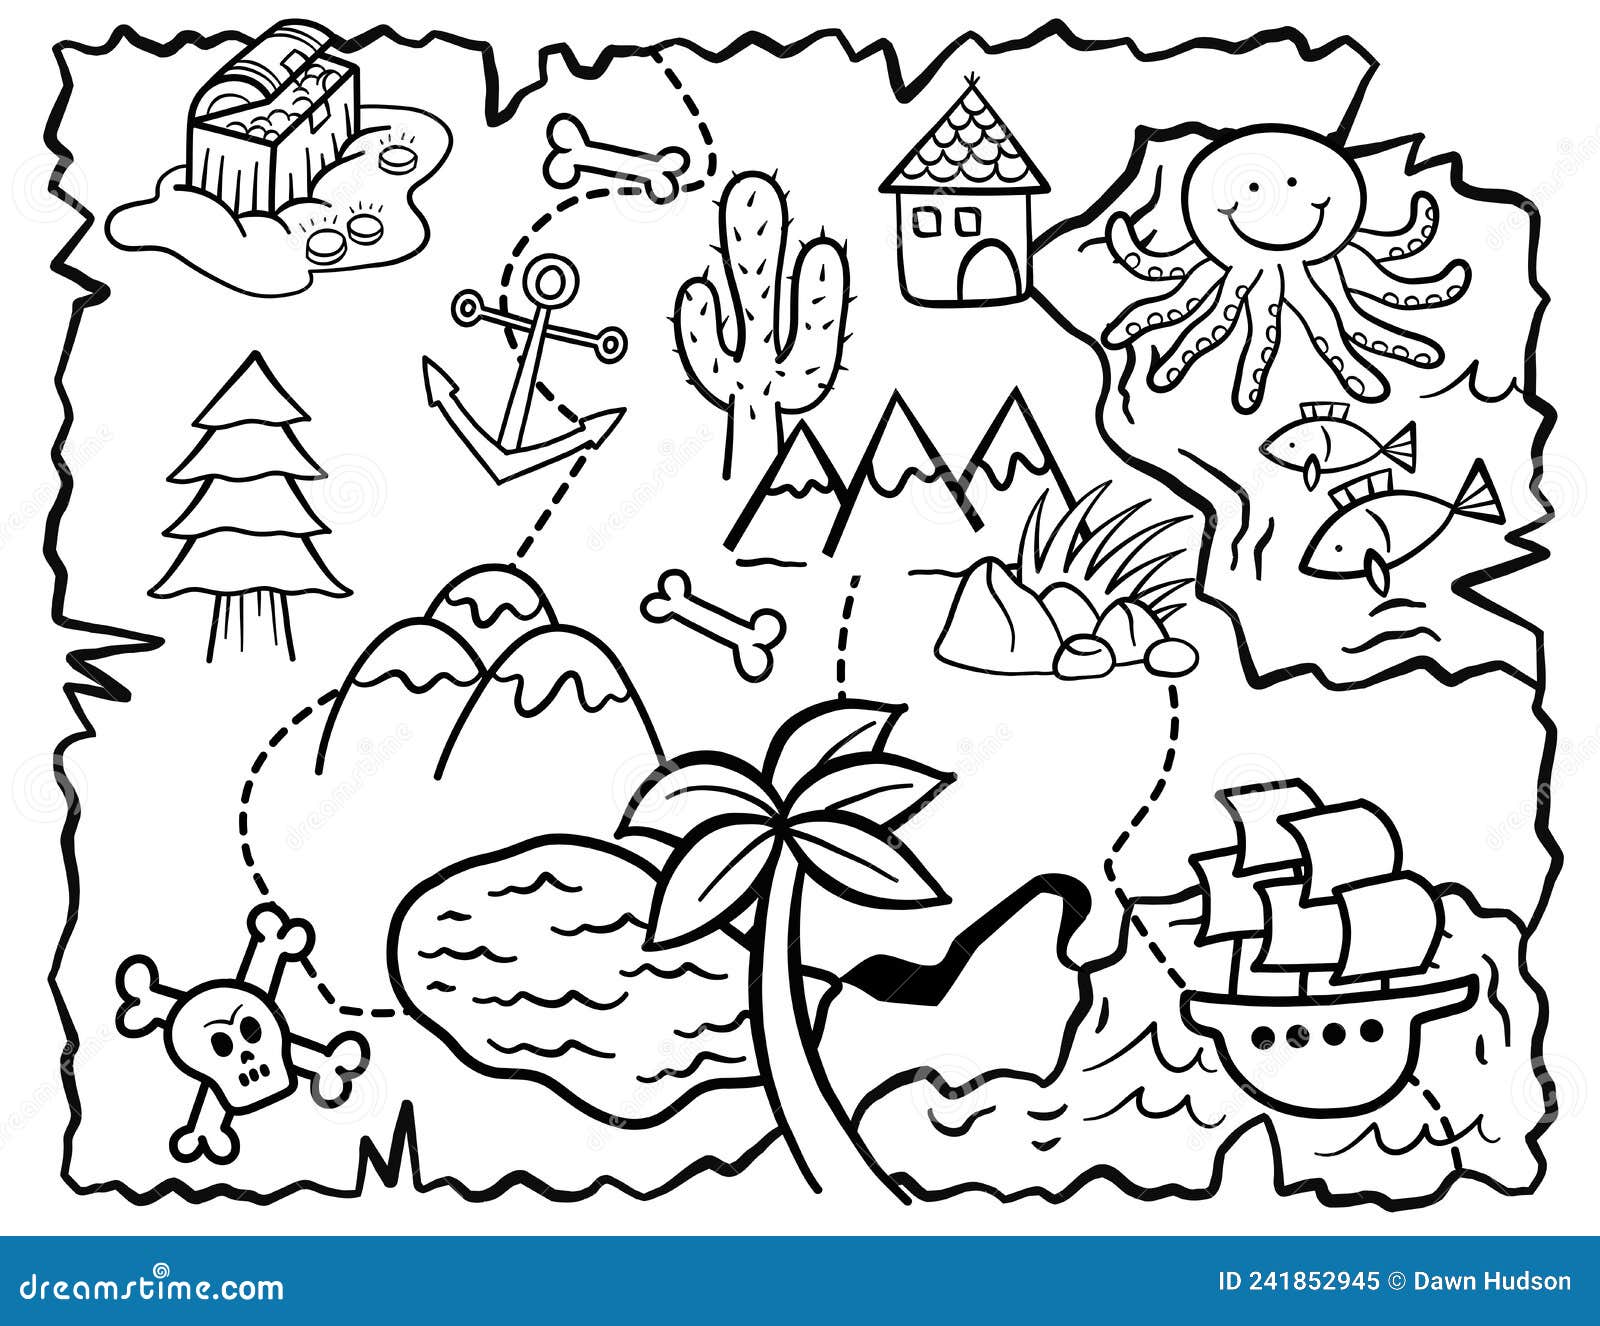 Cute kids doodle treasure map coloring page stock vector